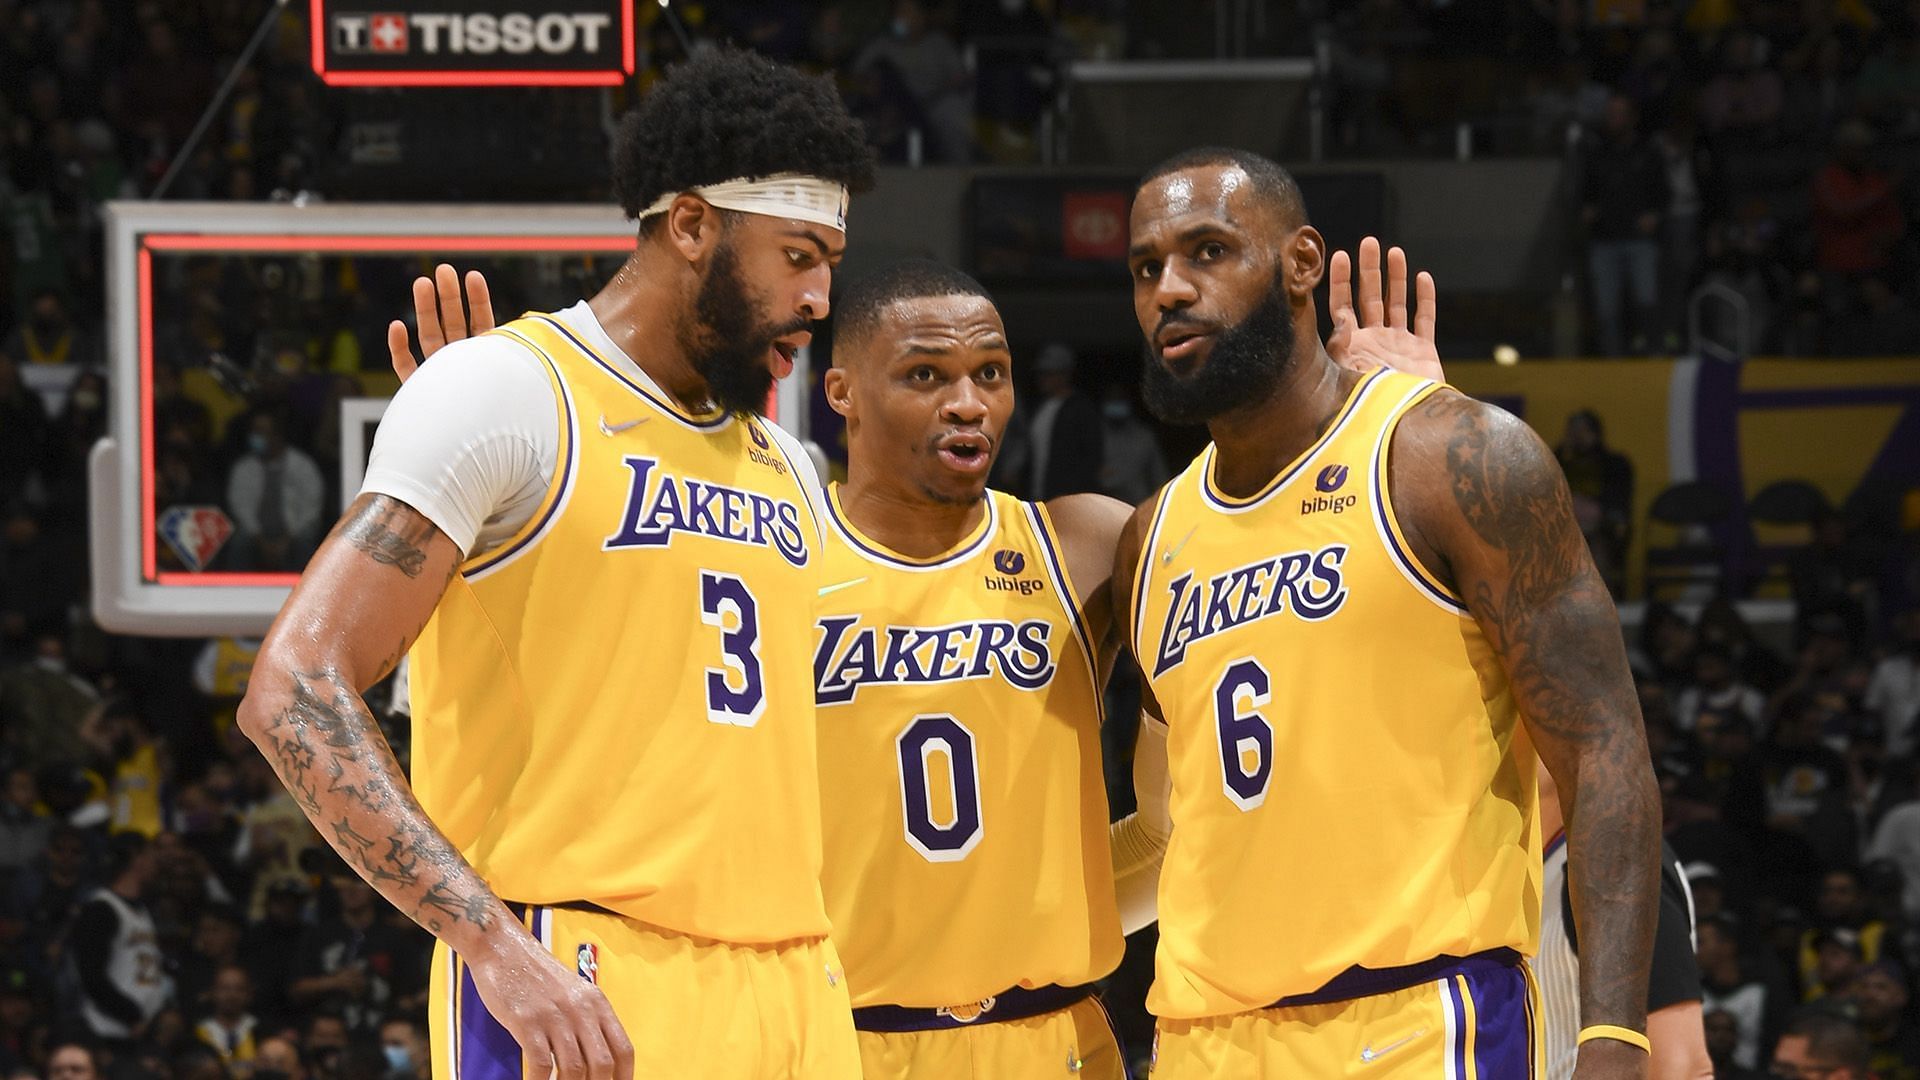 The LA Lakers could win back-to-back games for the first time since early January if they beat the Washington Wizards on Saturday. [Photo: NBA.com]